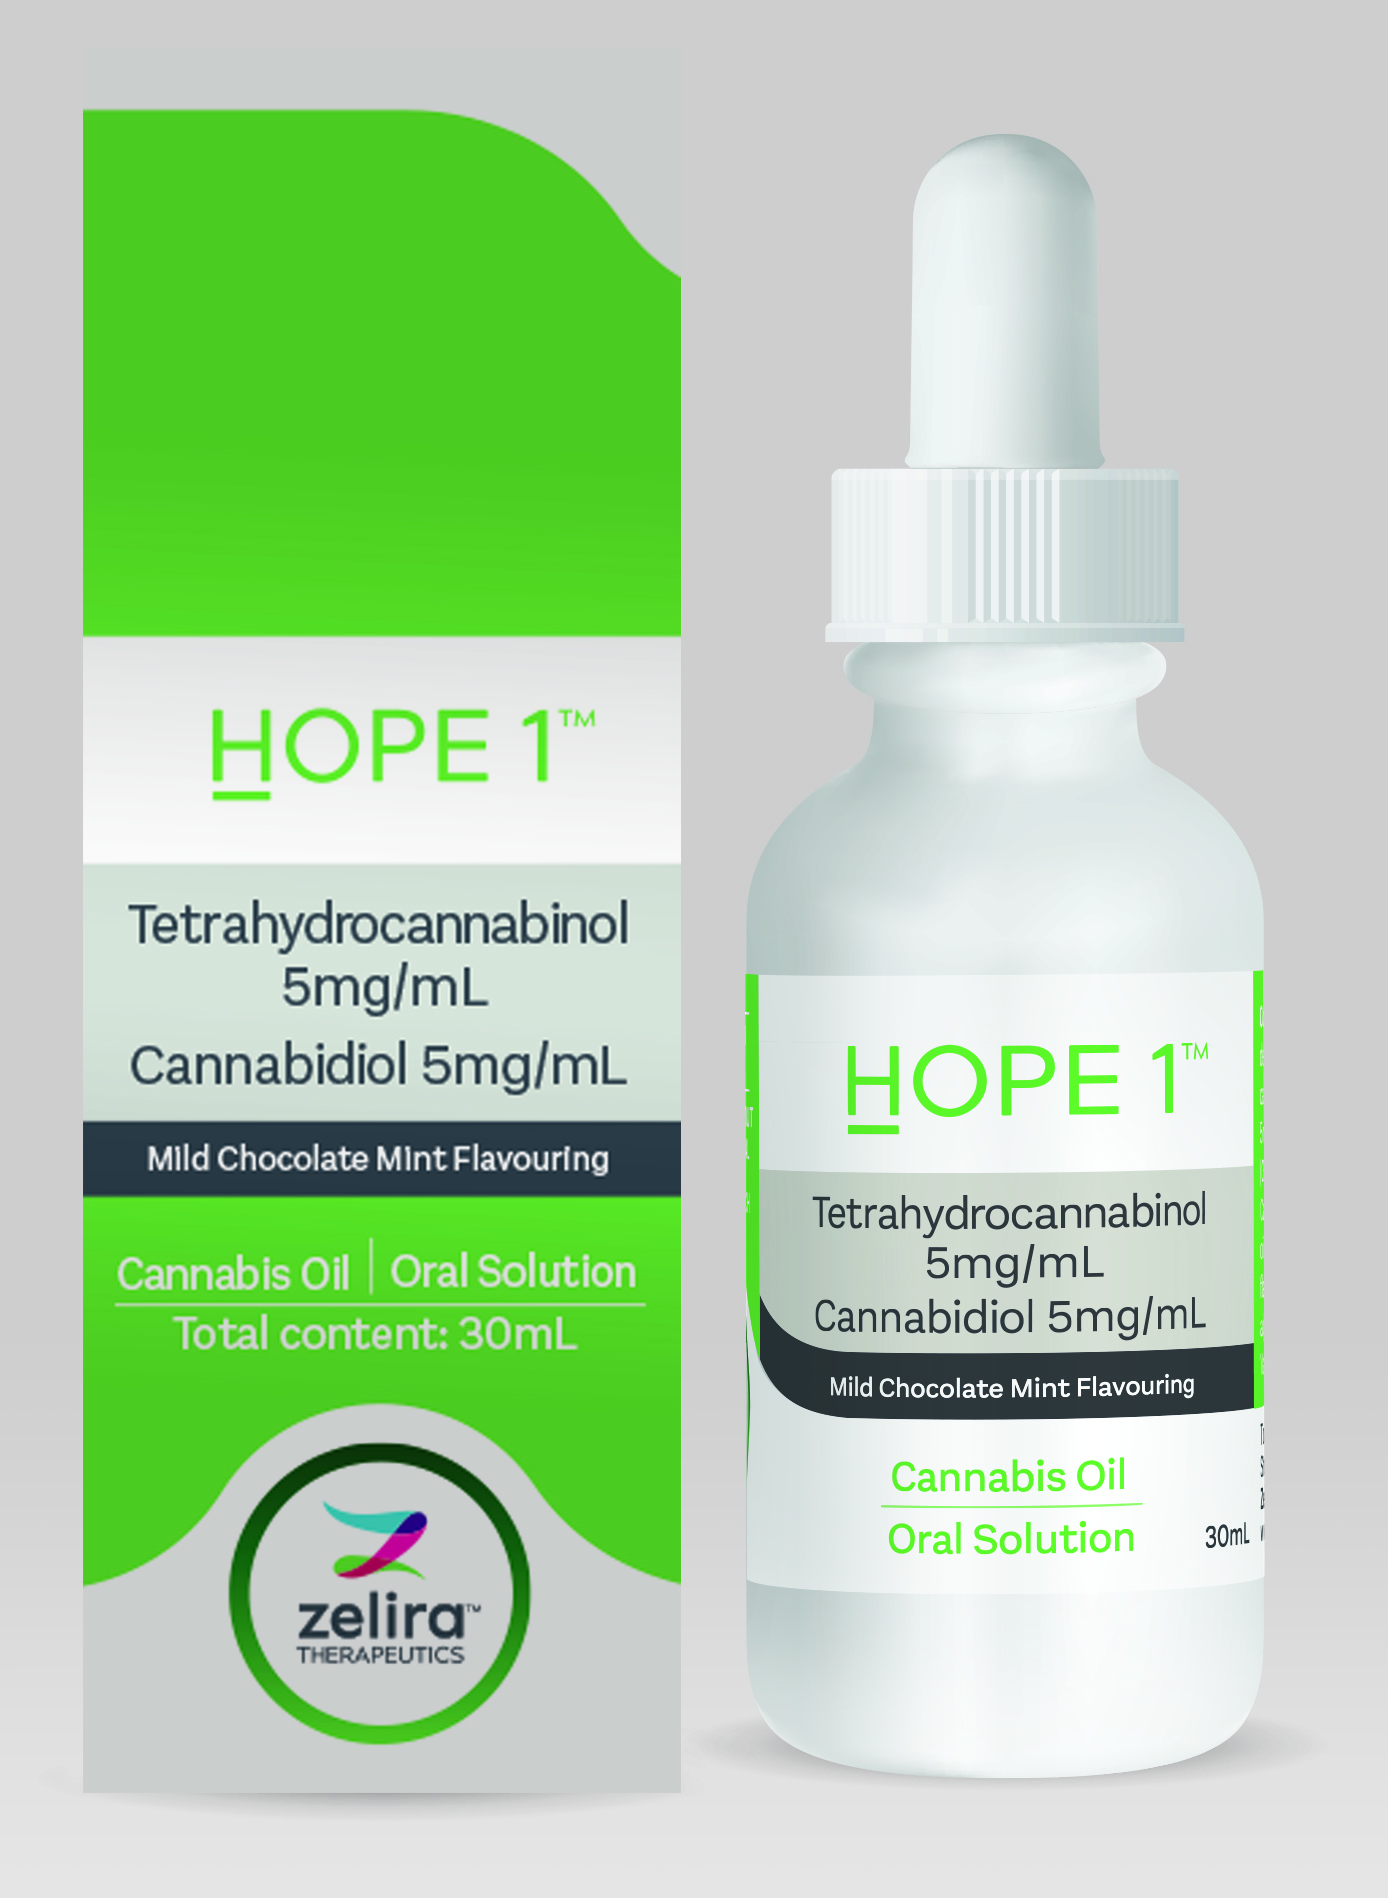 Zelia Hope 1 Box and Bottle 1 - Cannabis in a Capsule: Innovation at Work